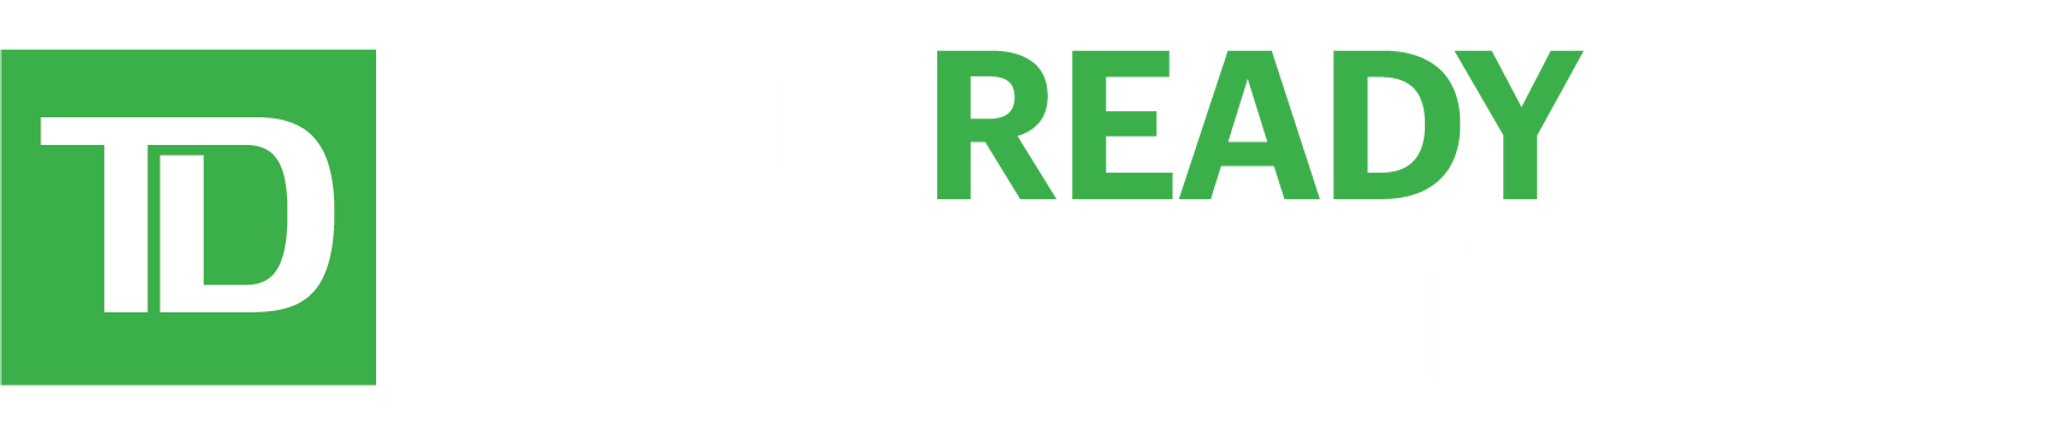 TD Bank logo, reading TD Ready Commitment beside the interlocked T and D initials